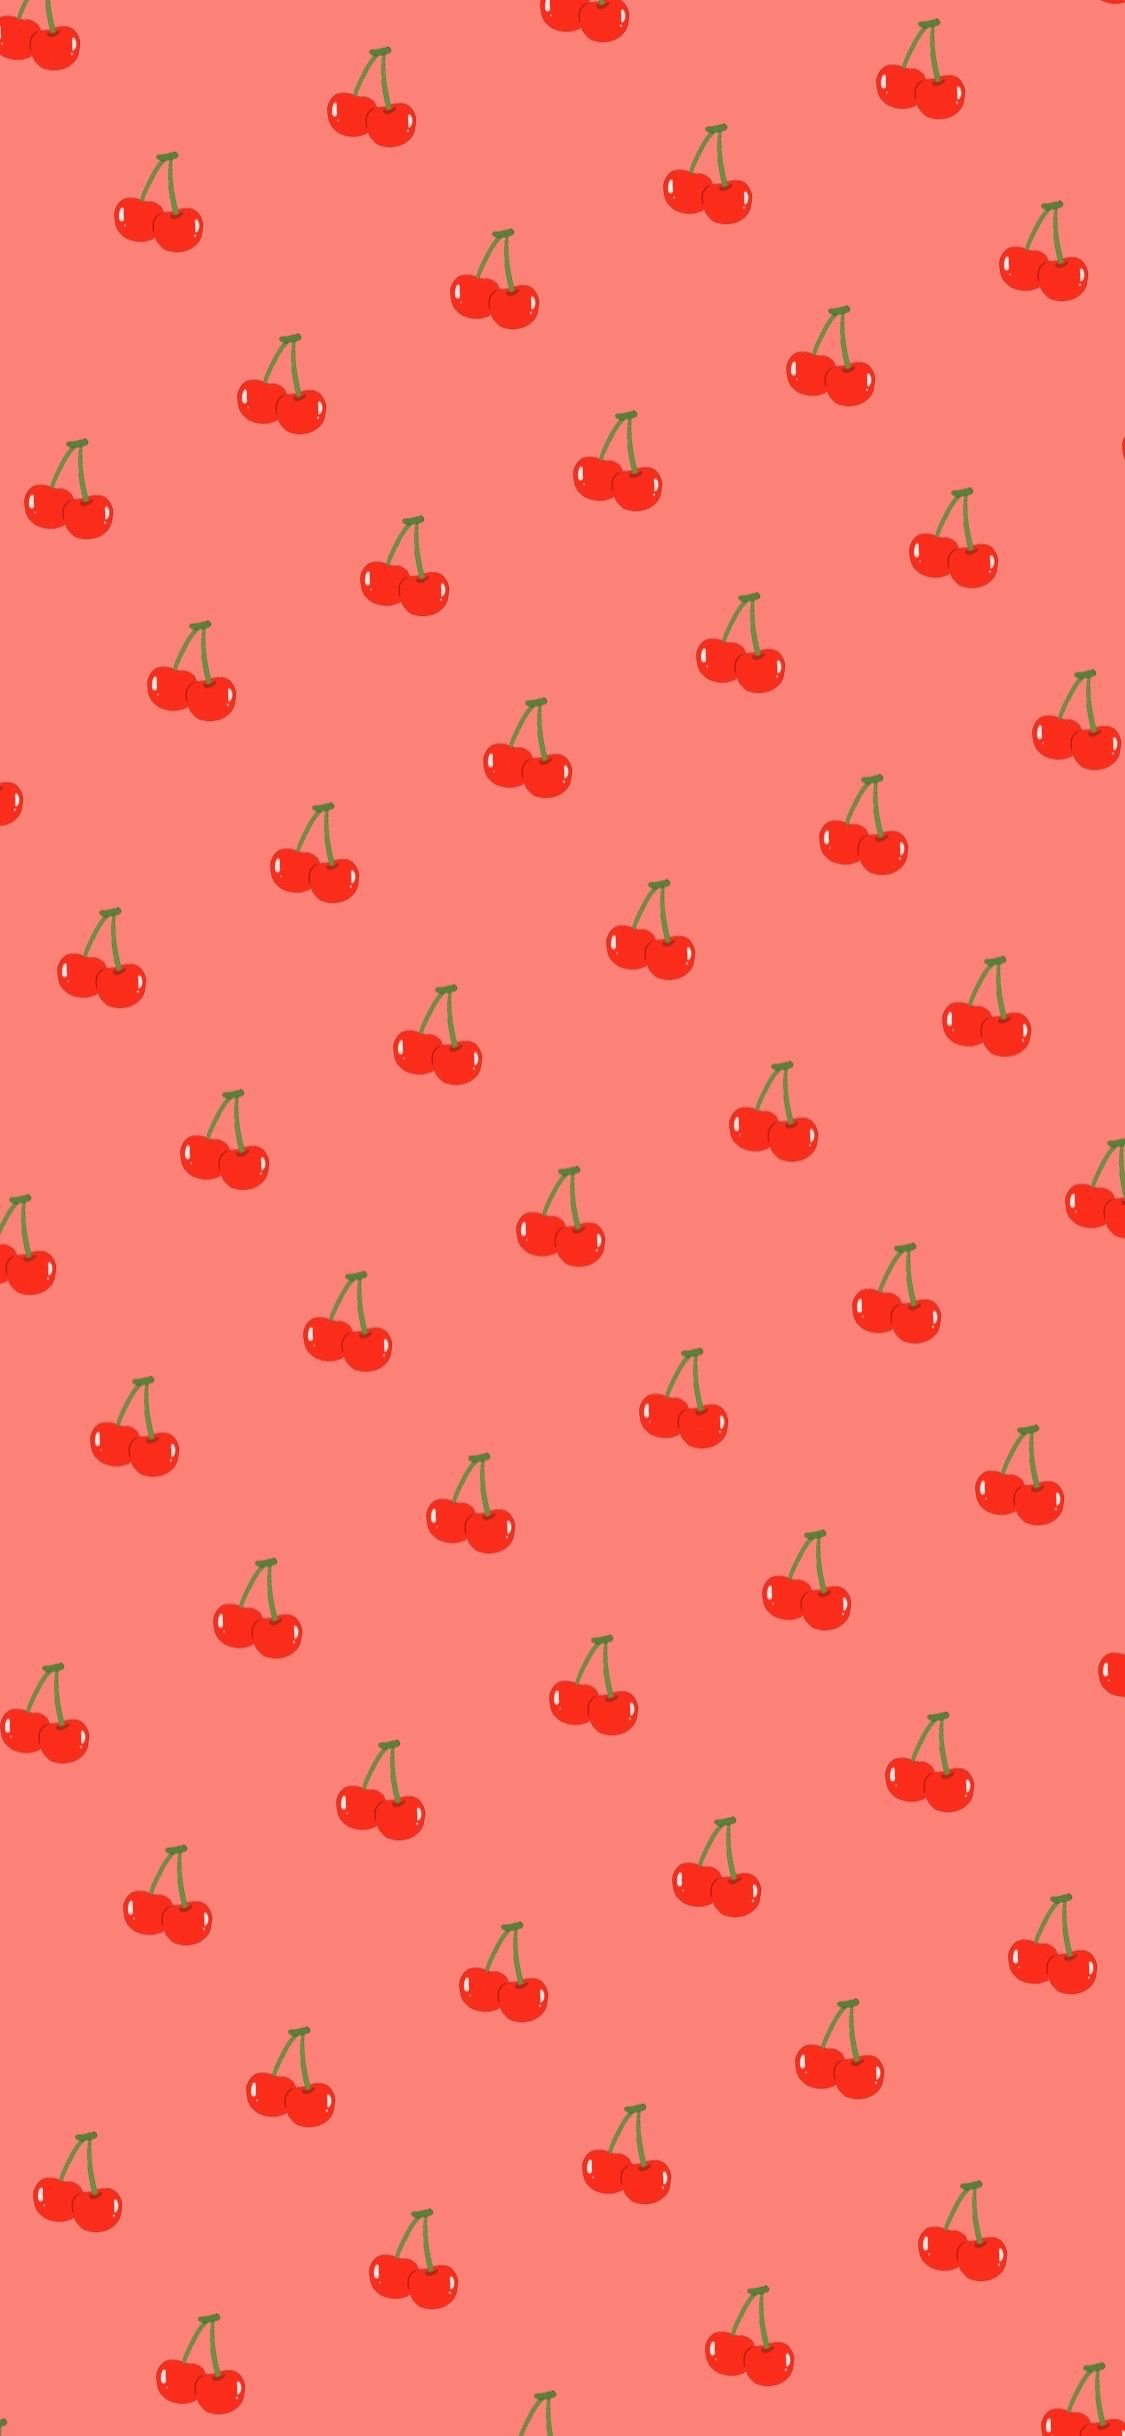 A pattern of red cherries on a salmon background - Cherry